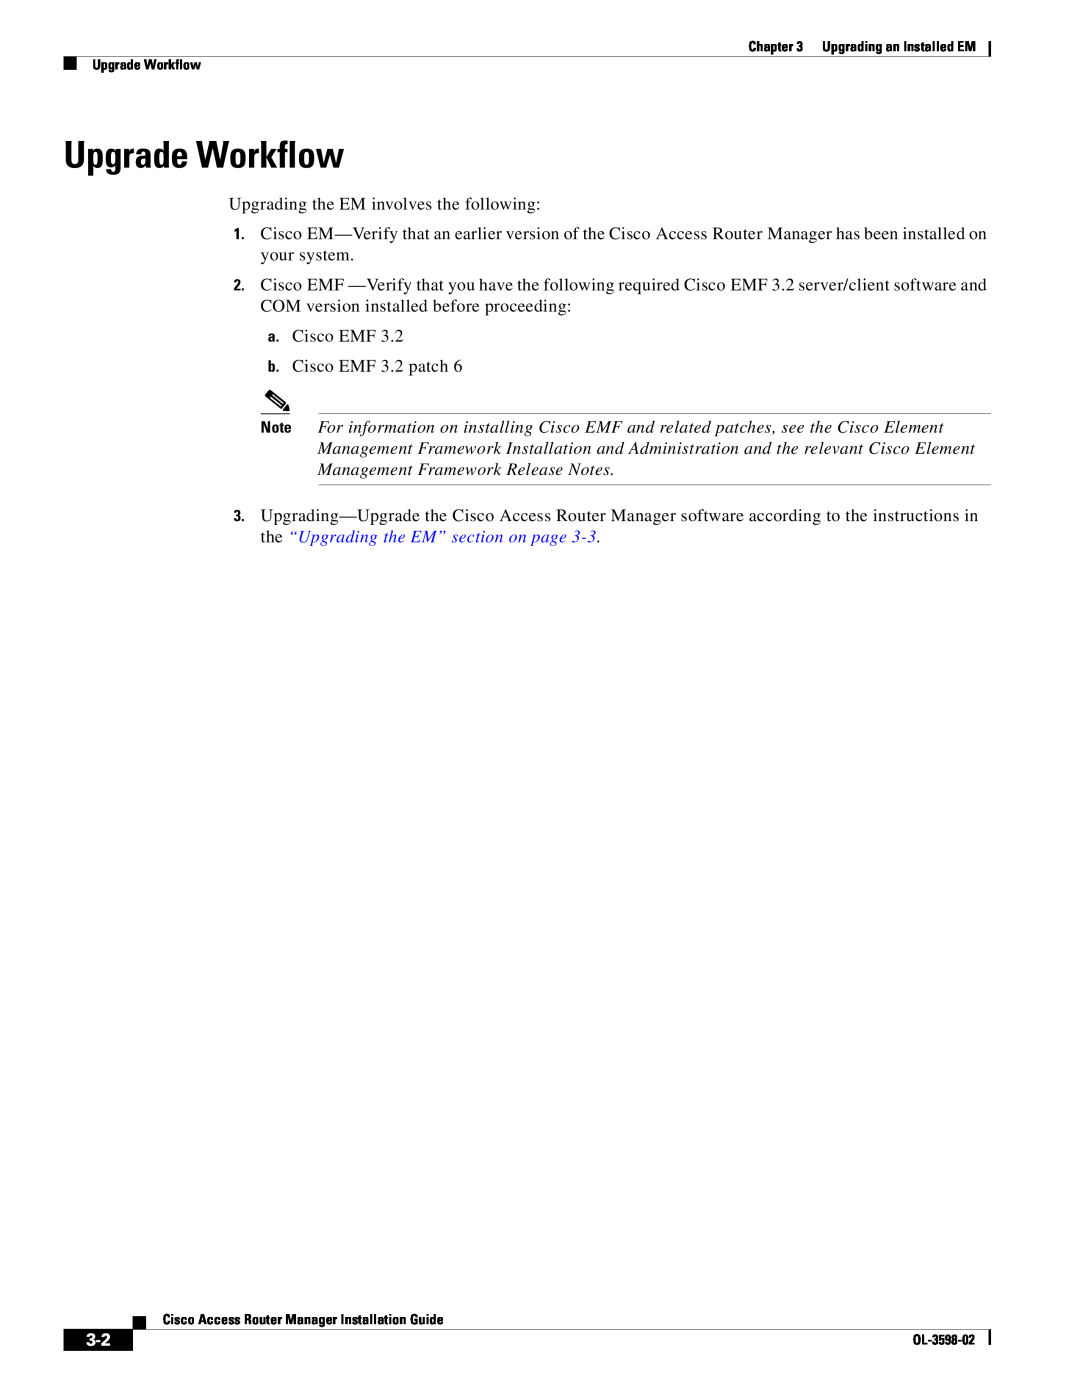 Cisco Systems OL-3598-02 manual Upgrade Workflow 